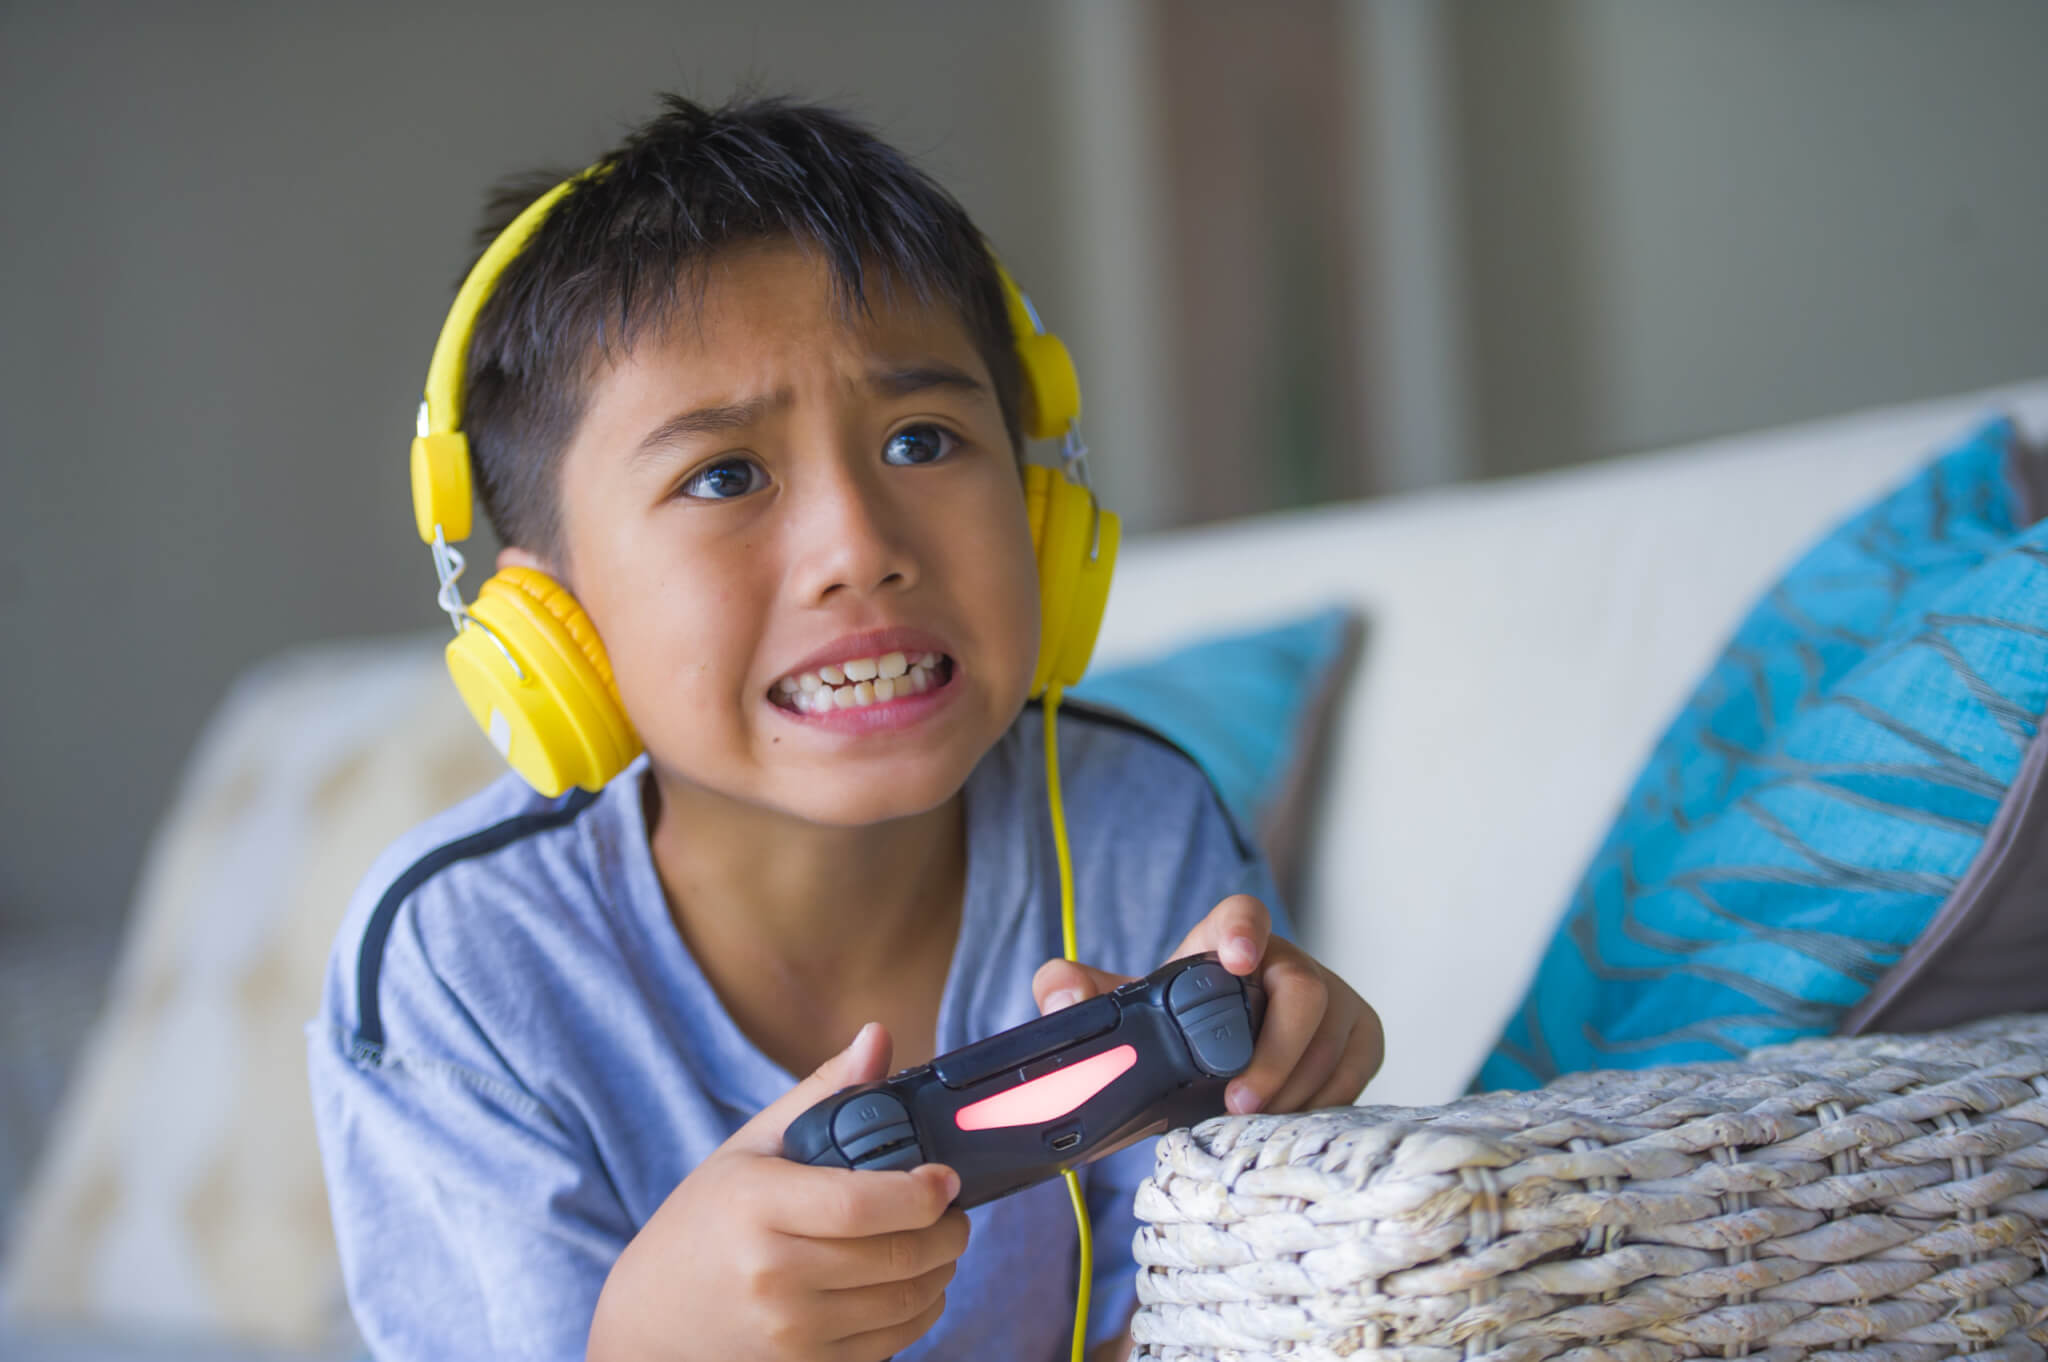 Child playing online video game